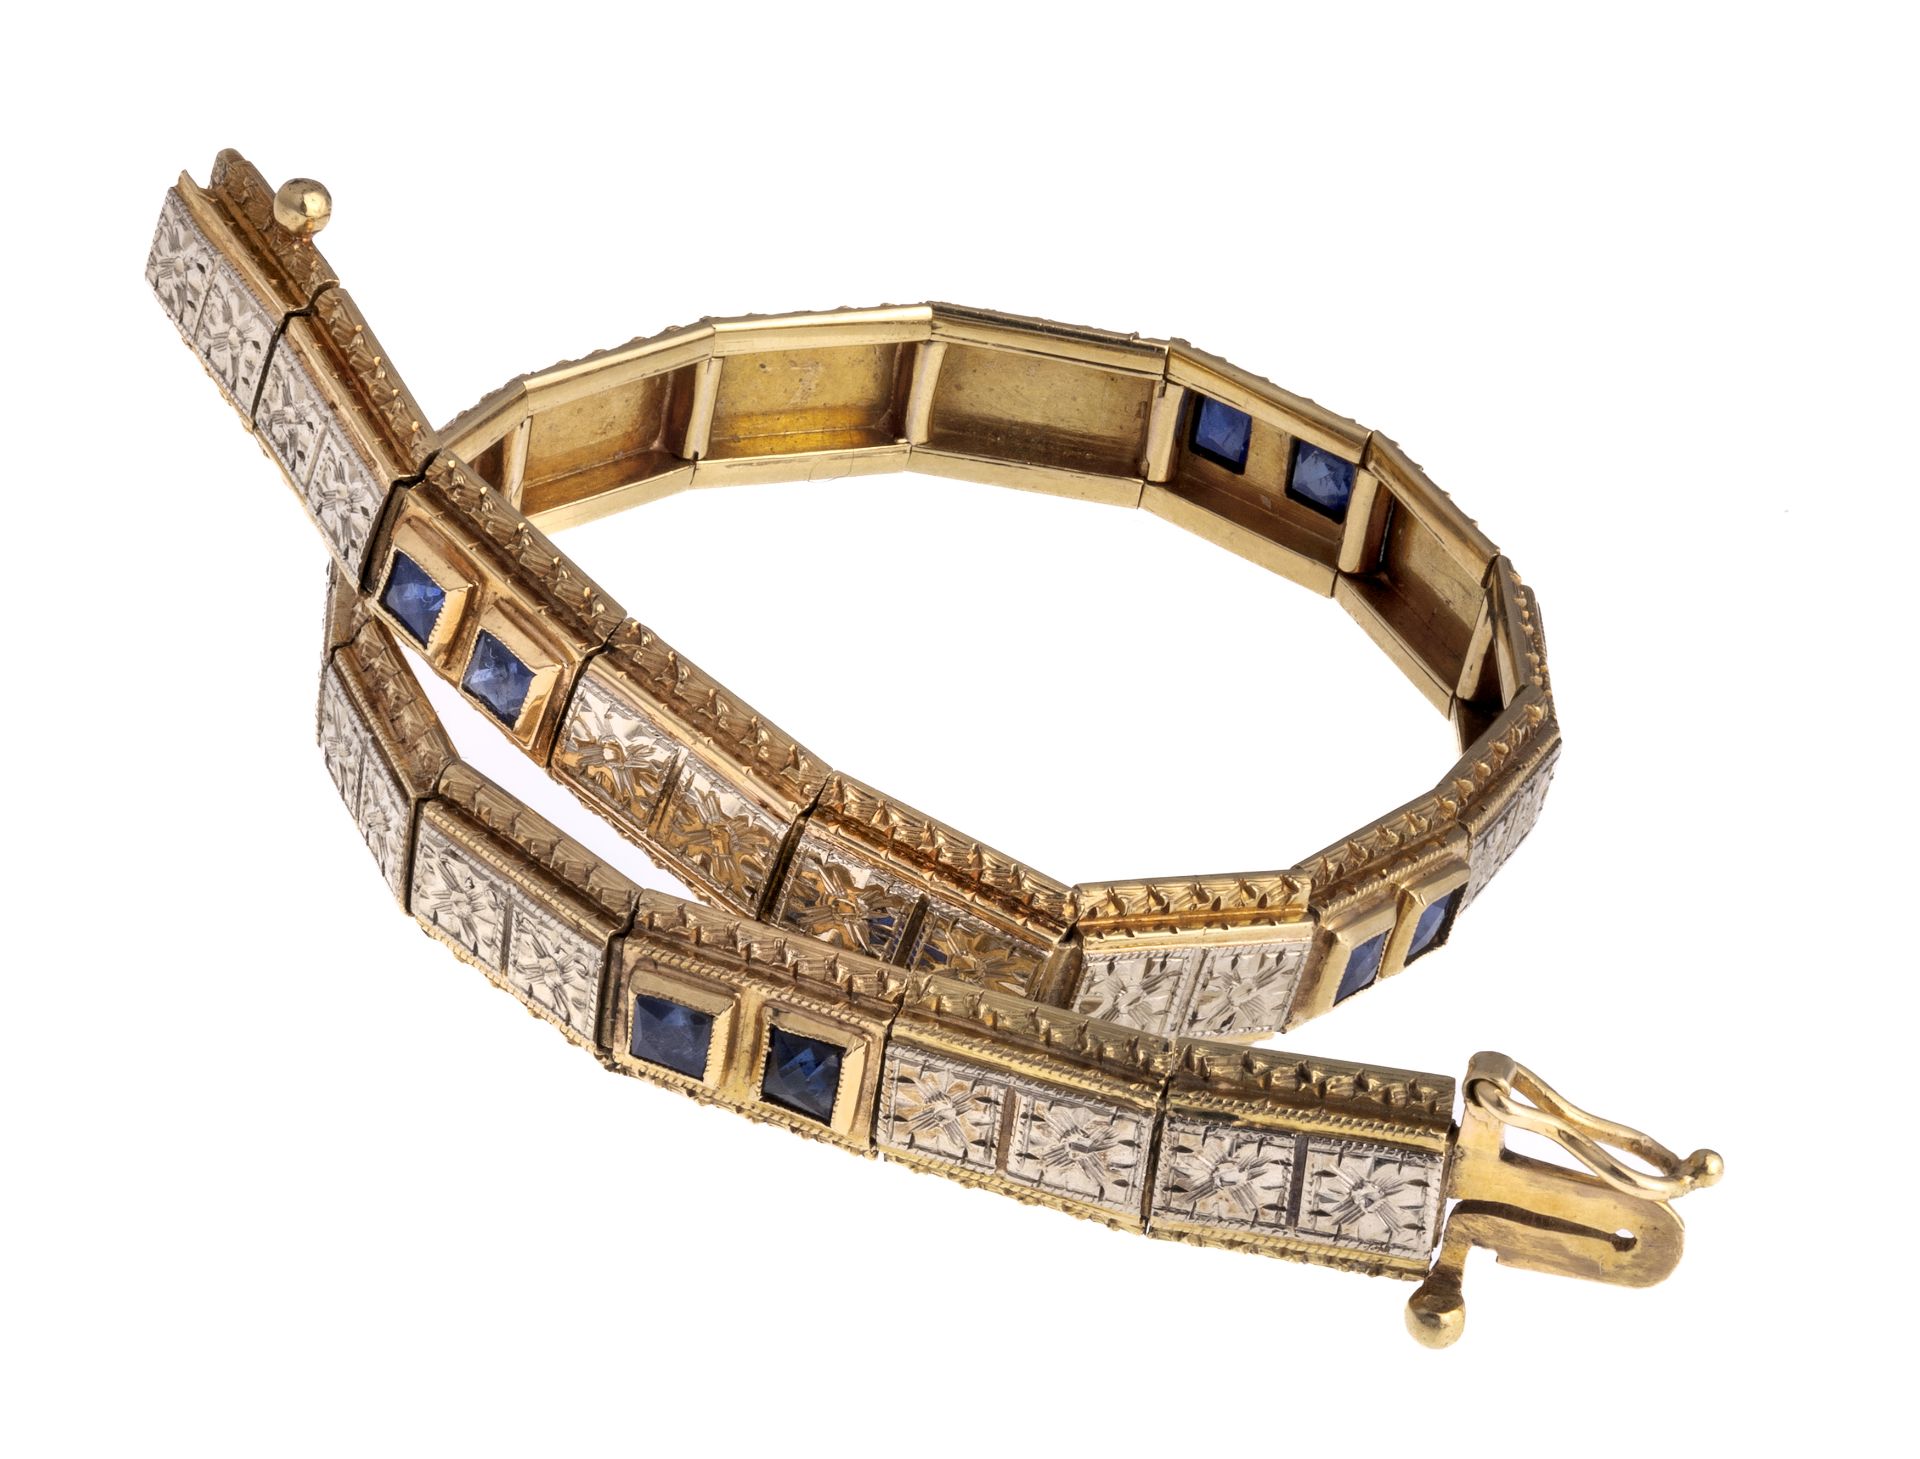 GOLD BRACELET WITH SAPPHIRES